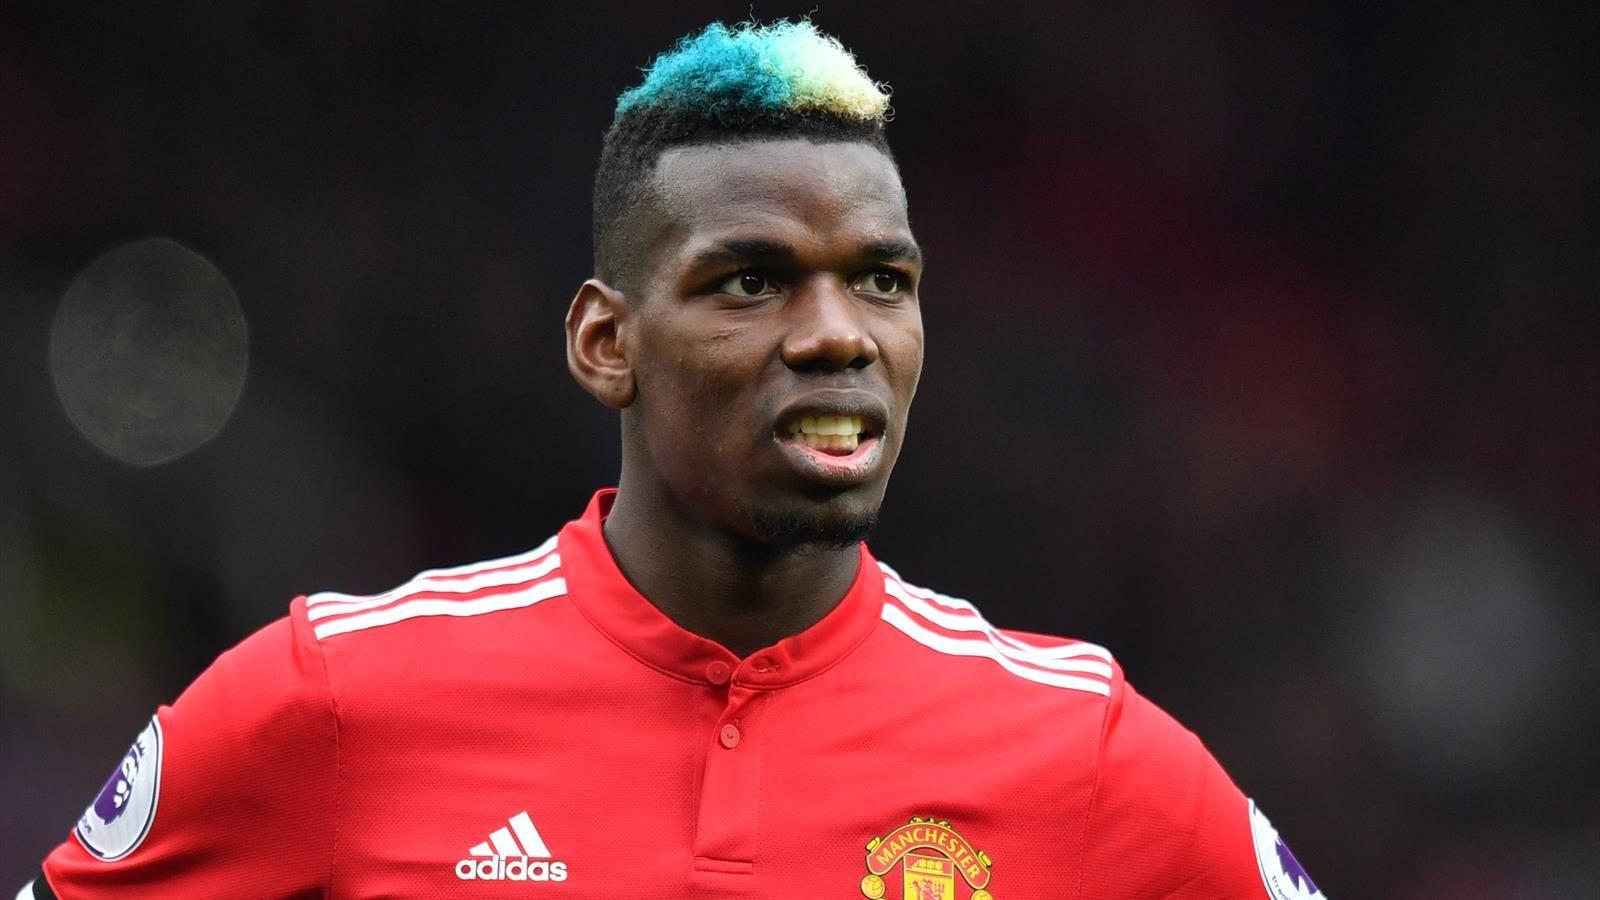 Paper Round: Paul Pogba tells Manchester United that he wants